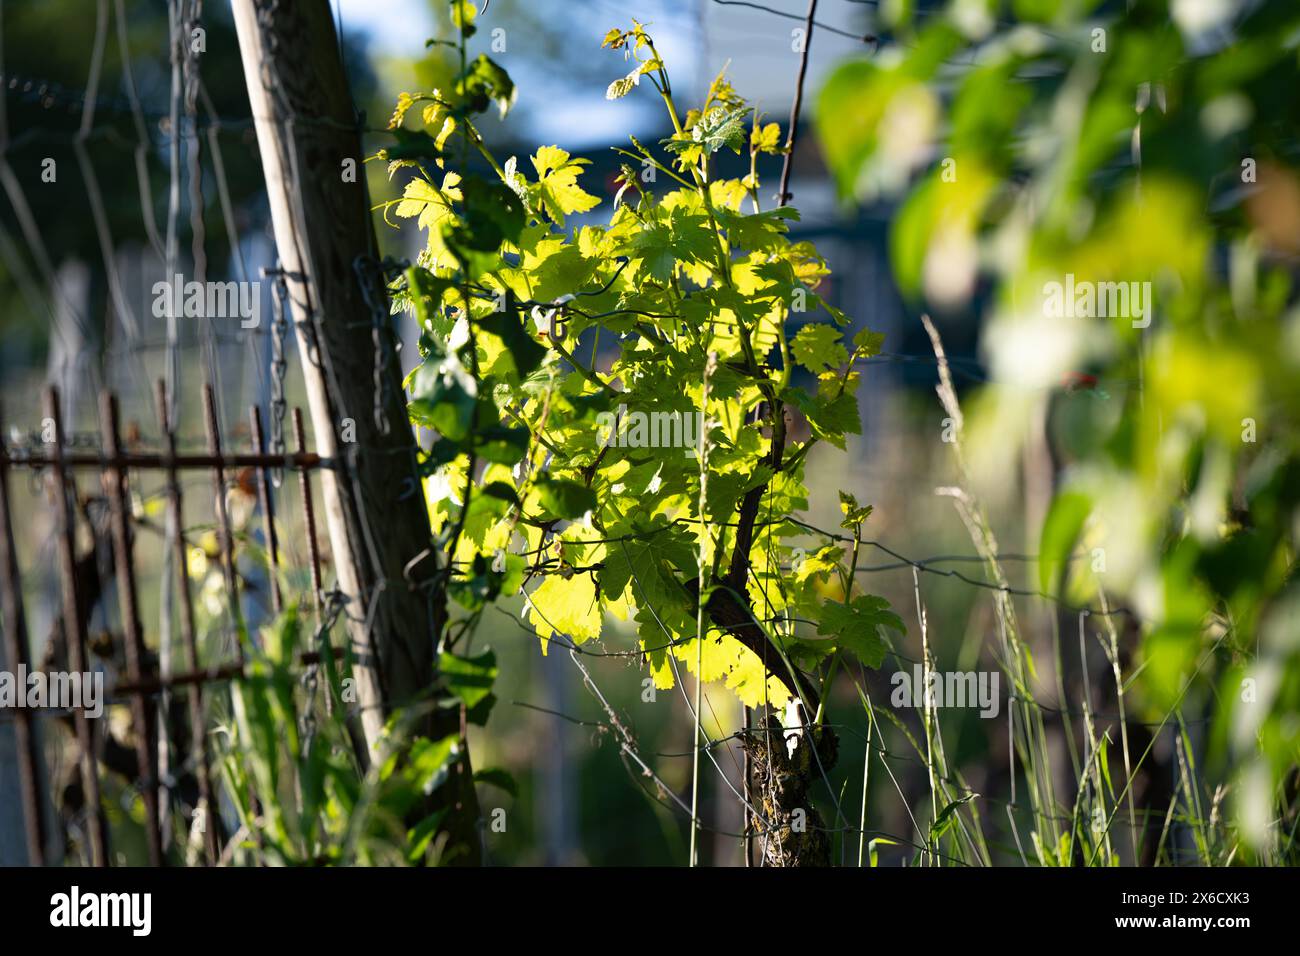 Overgrown vineyard in spring, close-up, taken in southern Germany. Stock Photo